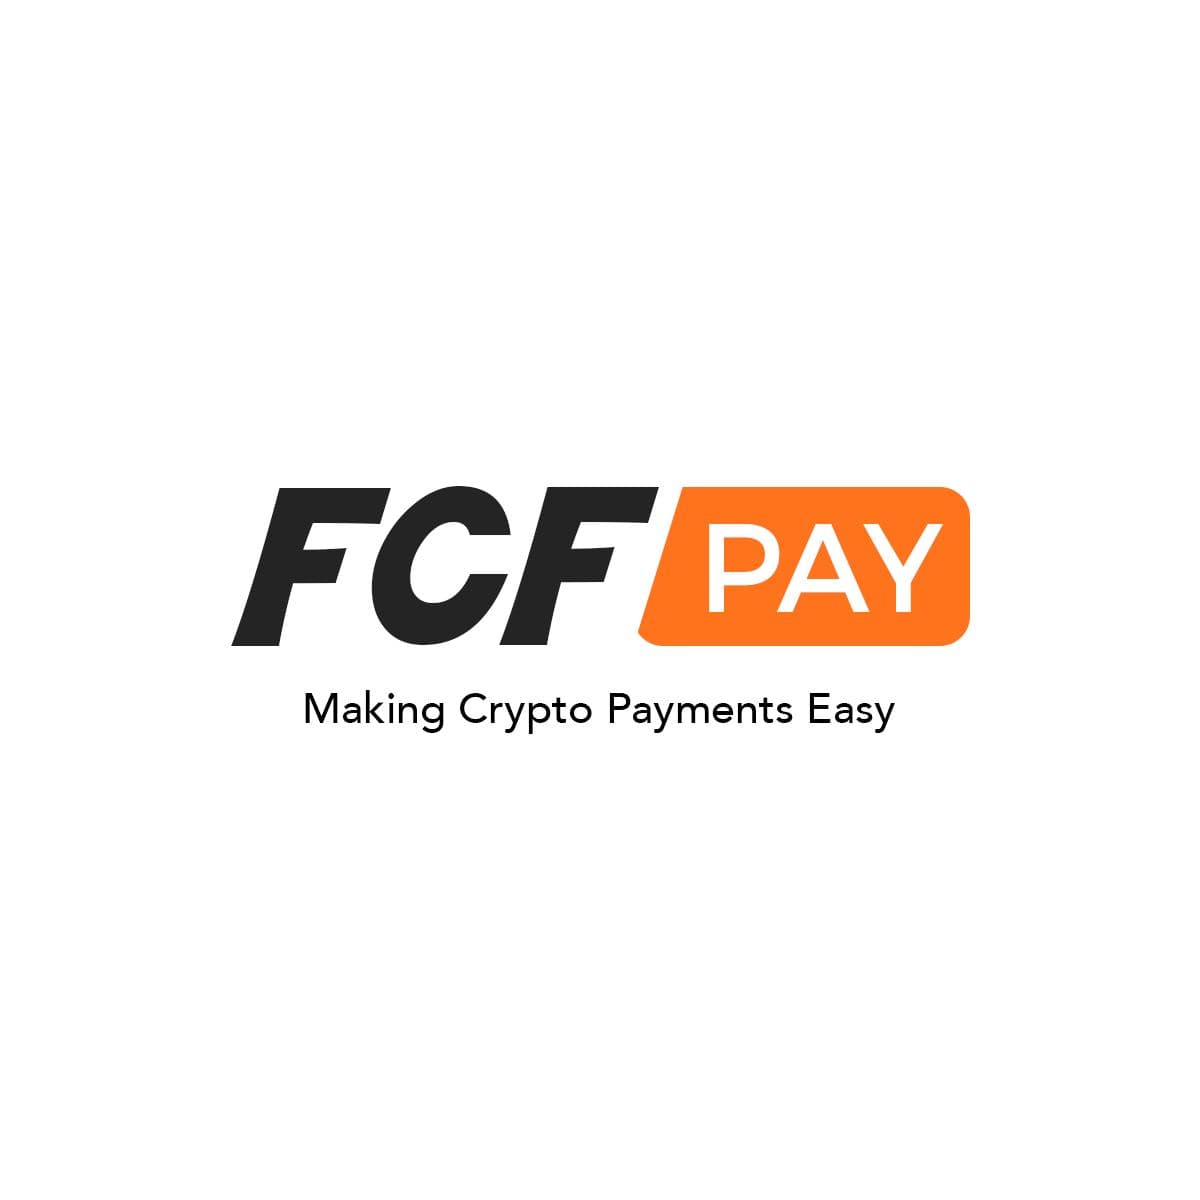 French Connection Finance Launches Innovative Payment Gateway